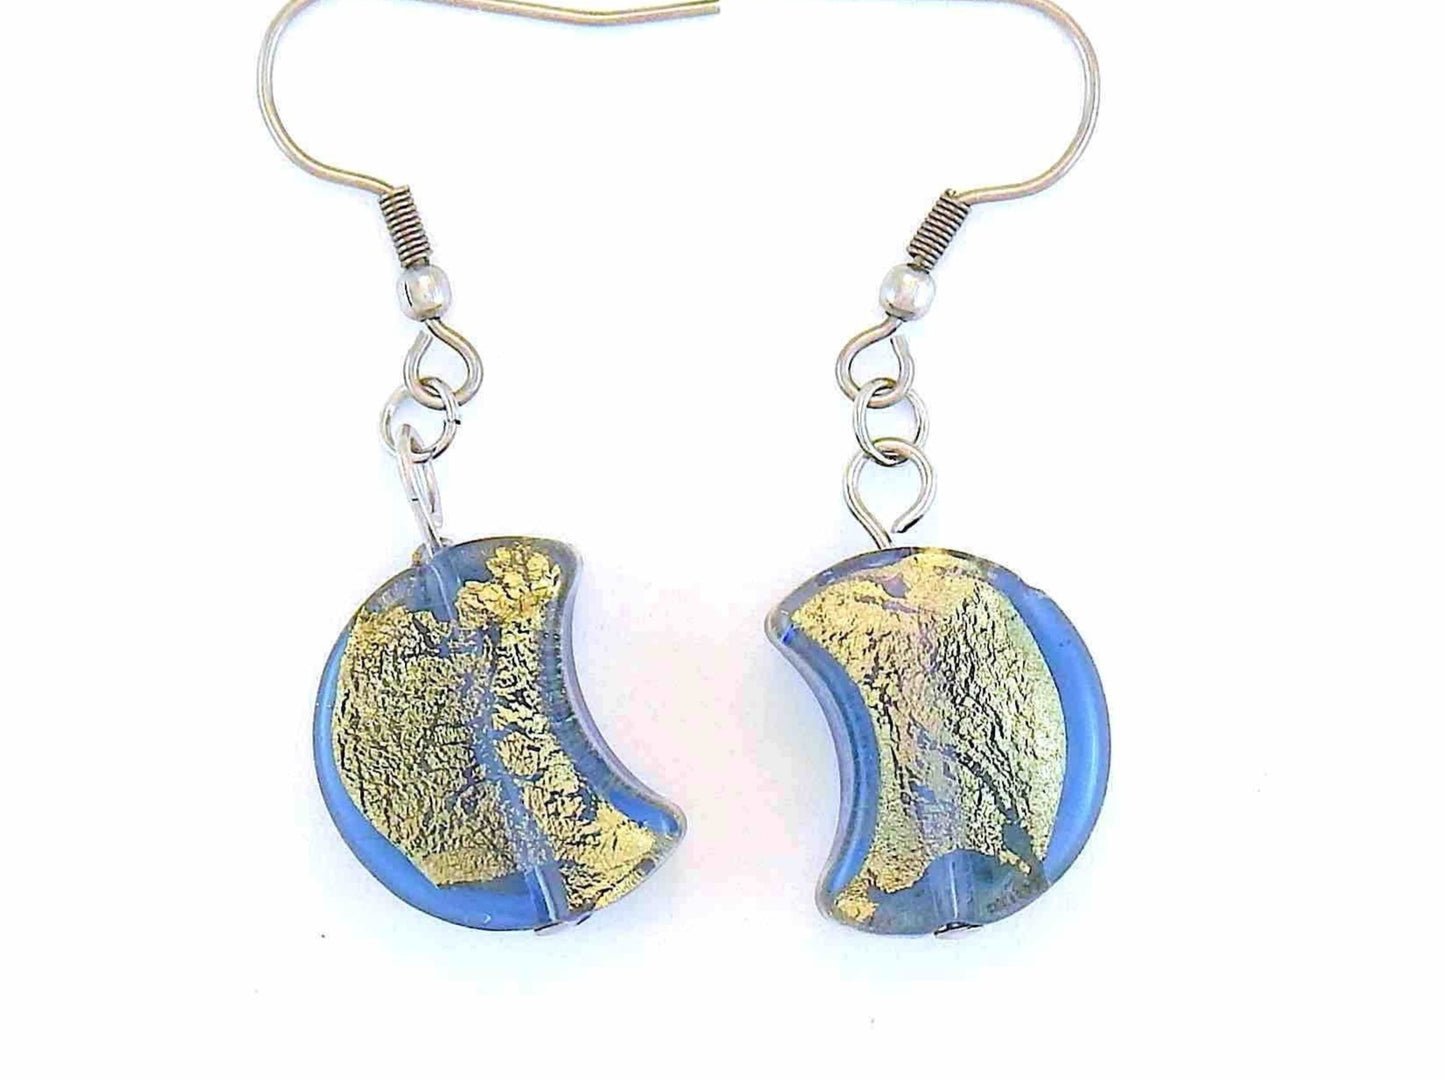 Short earrings with Murano glass half-moons, gold foil, available in 3 colours (clear, blue, khaki), gold-toned stainless steel lever back hooks